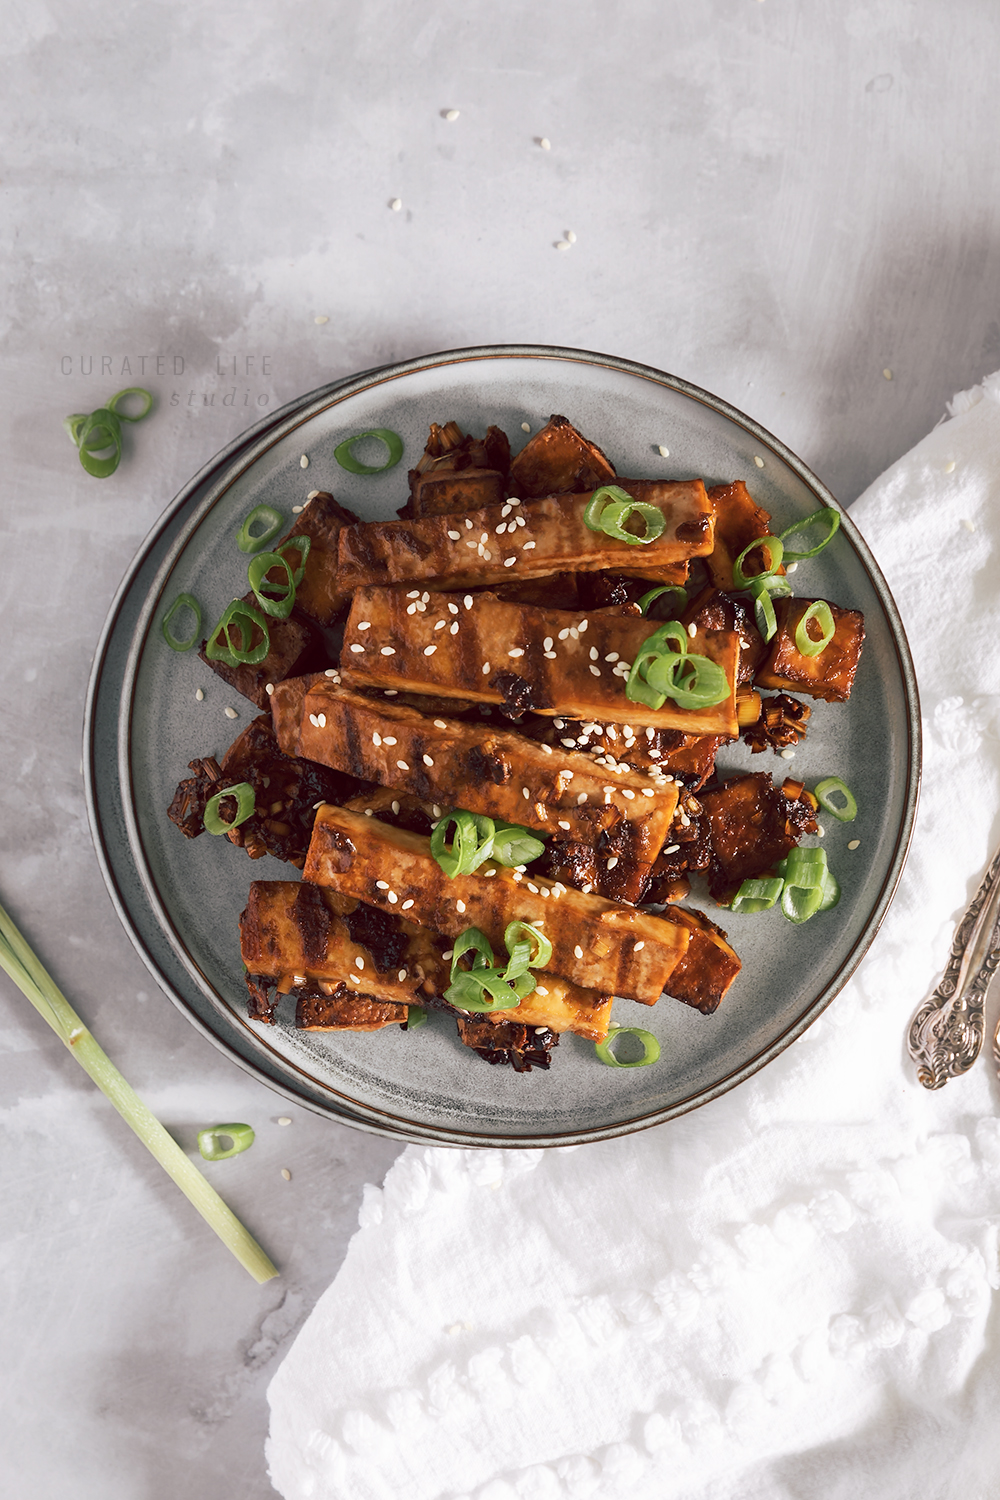 A bird's eye view of a blue plate overflowing with stripes of tofu, seared from a griddle pan. Scattered onto are sesame seeds and freshly chopped spring onions.

#Vietnamese #Recipe #Vegan #Spicy #Crispy #Marinade #Easy